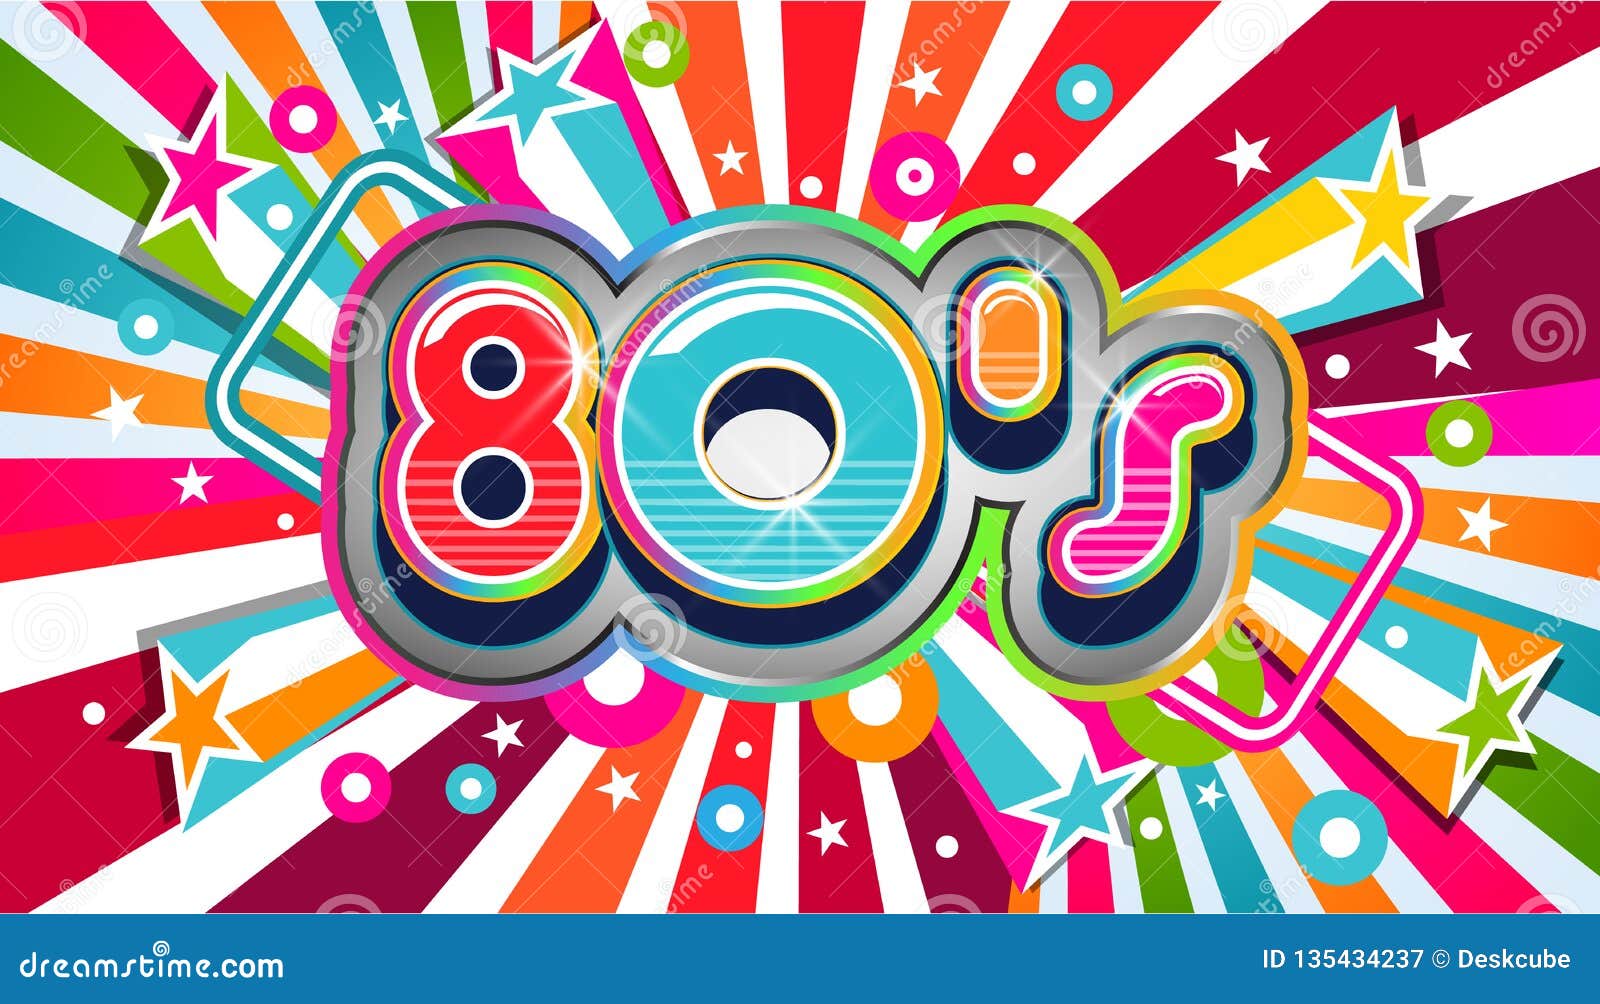 80s vintage party background 